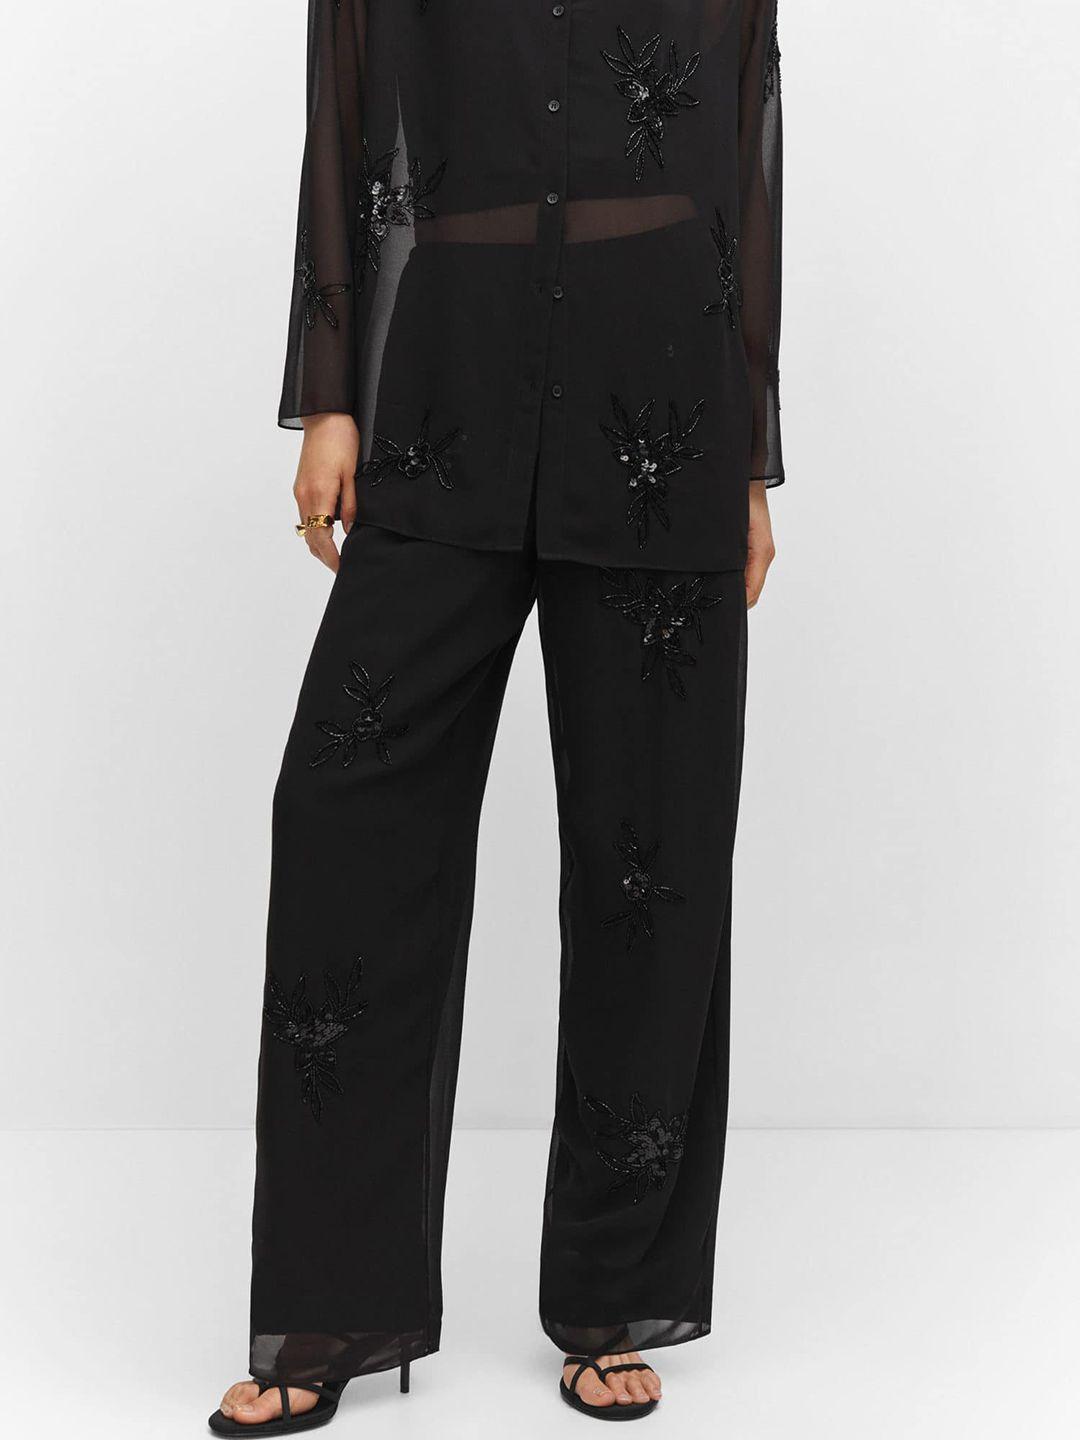 mango-women-floral-embellished-flared-high-rise-parallel-trousers